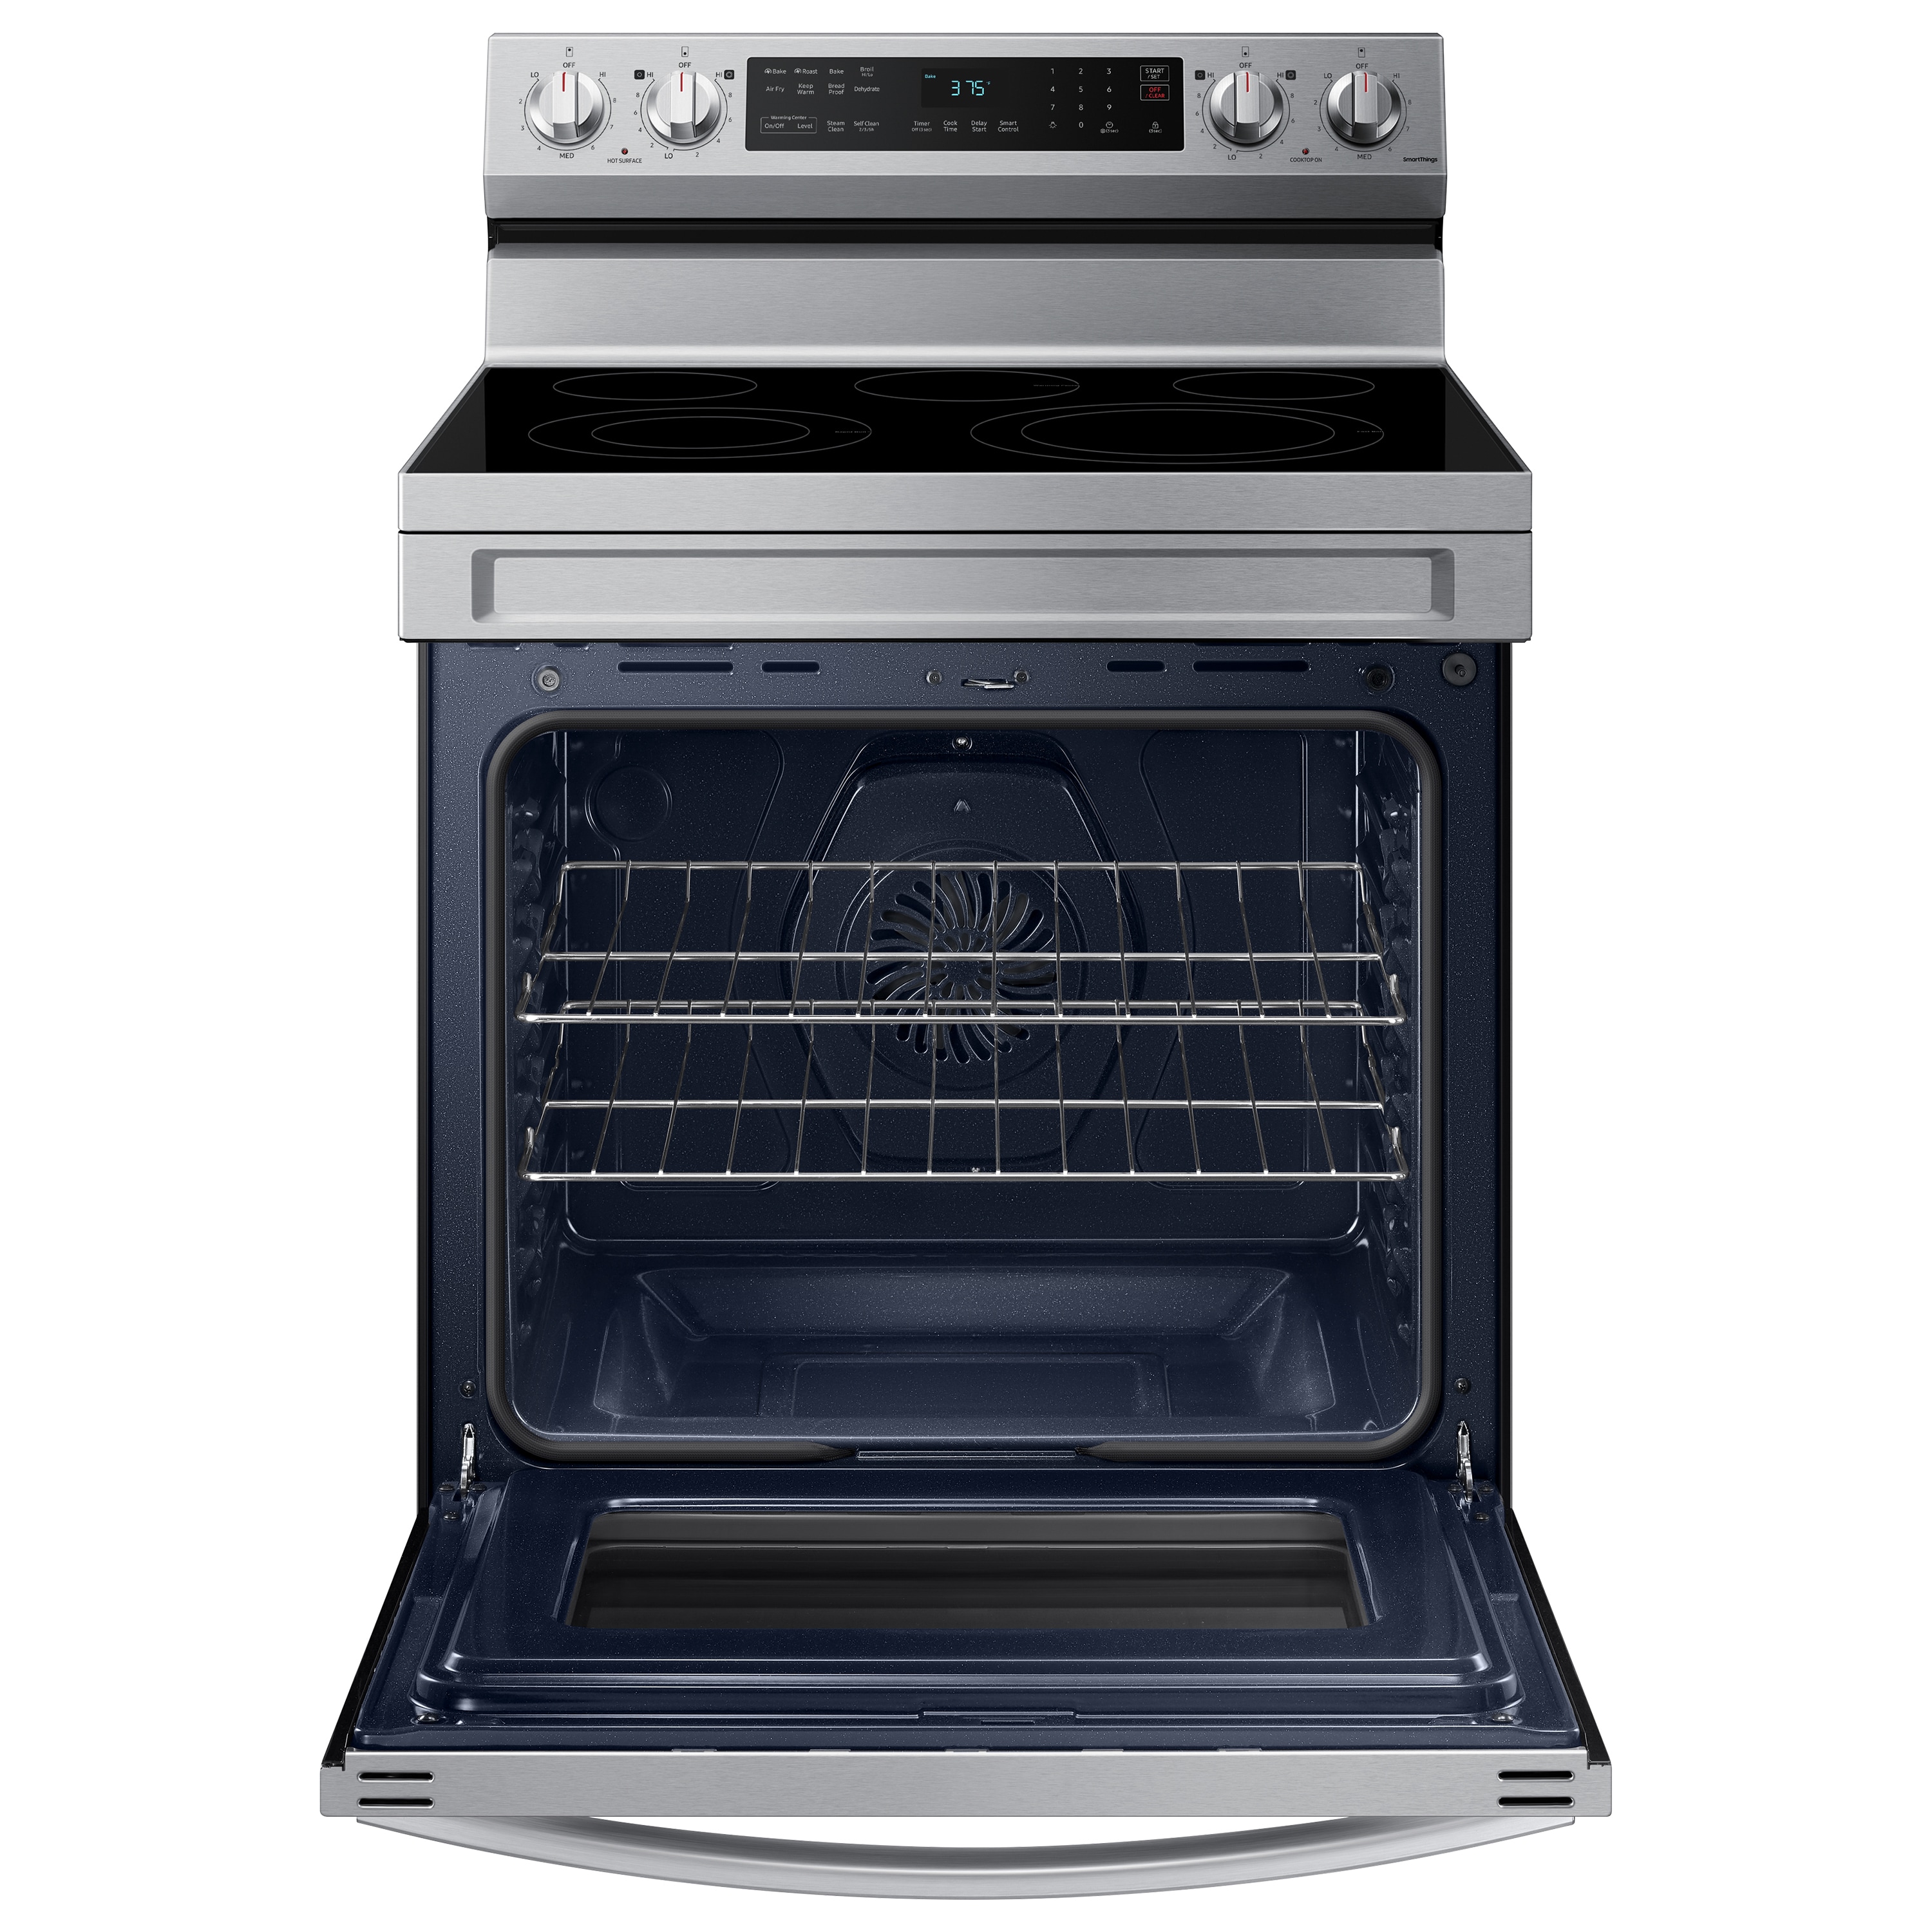 Convection Oven Ranges at